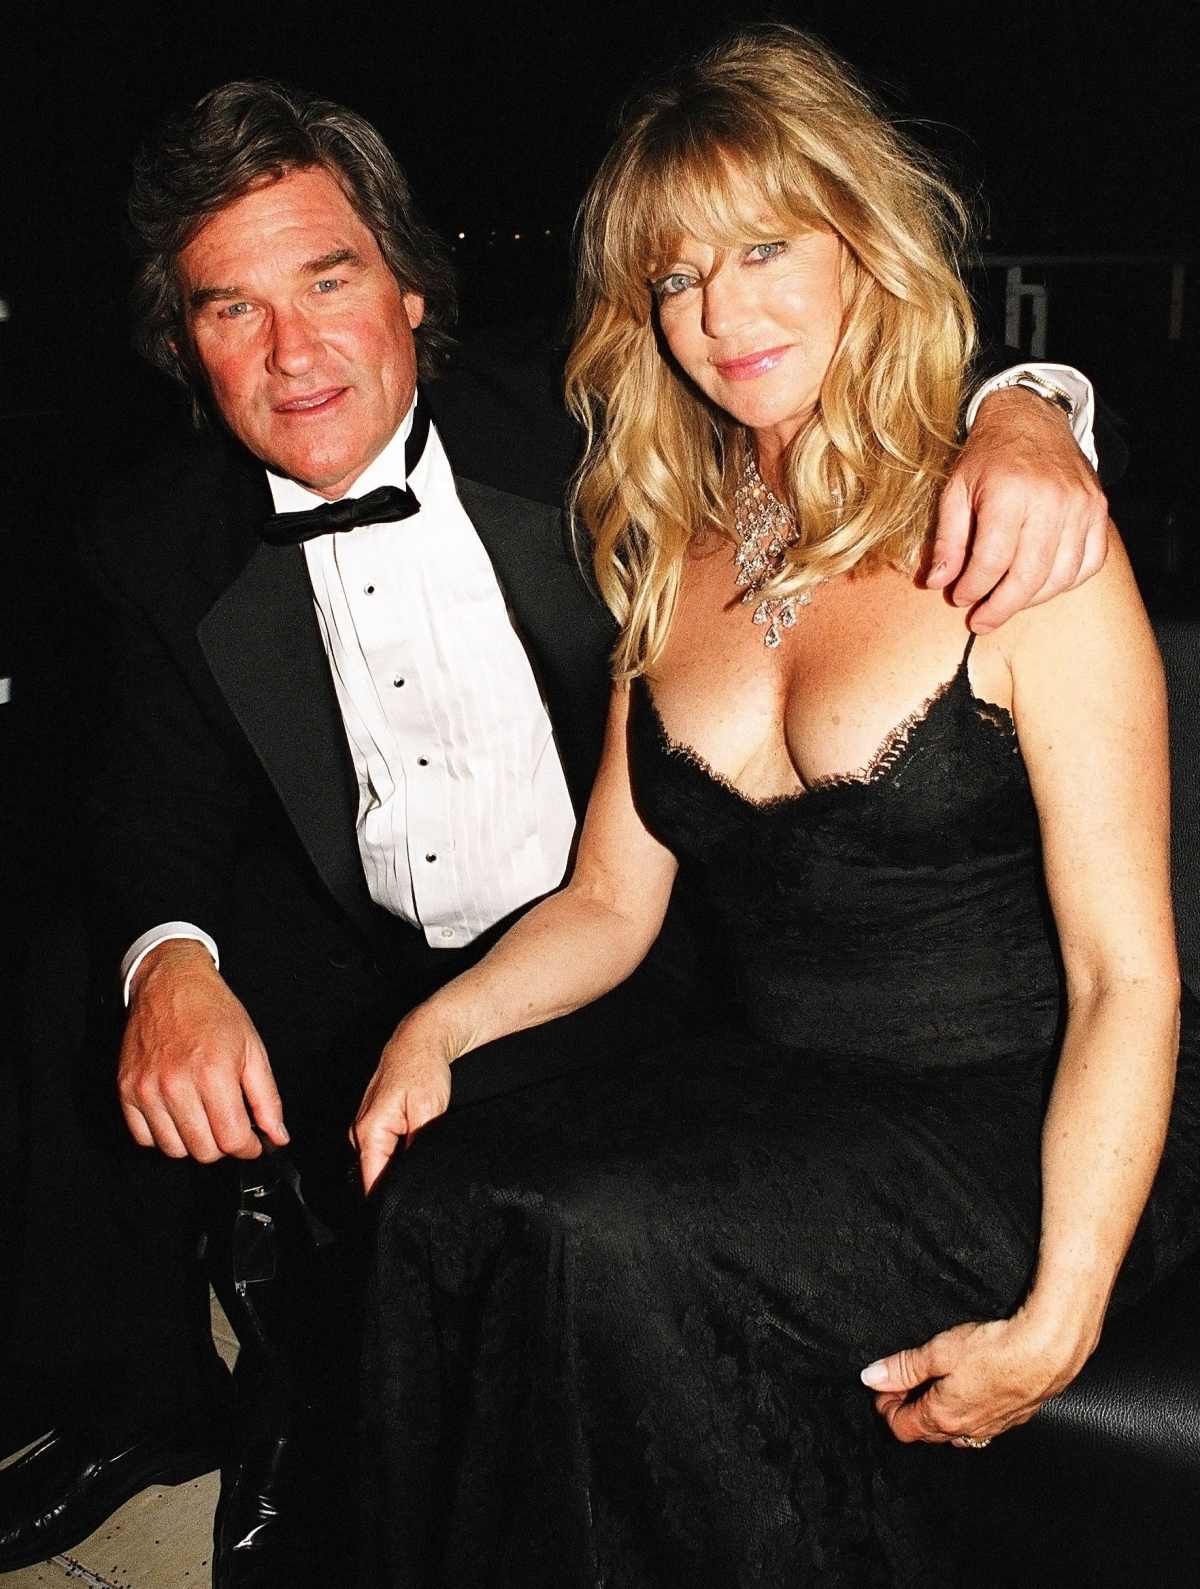 Goldie Hawn Fucking - Goldie Hawn, Kurt Russell's Love Story Over the Years